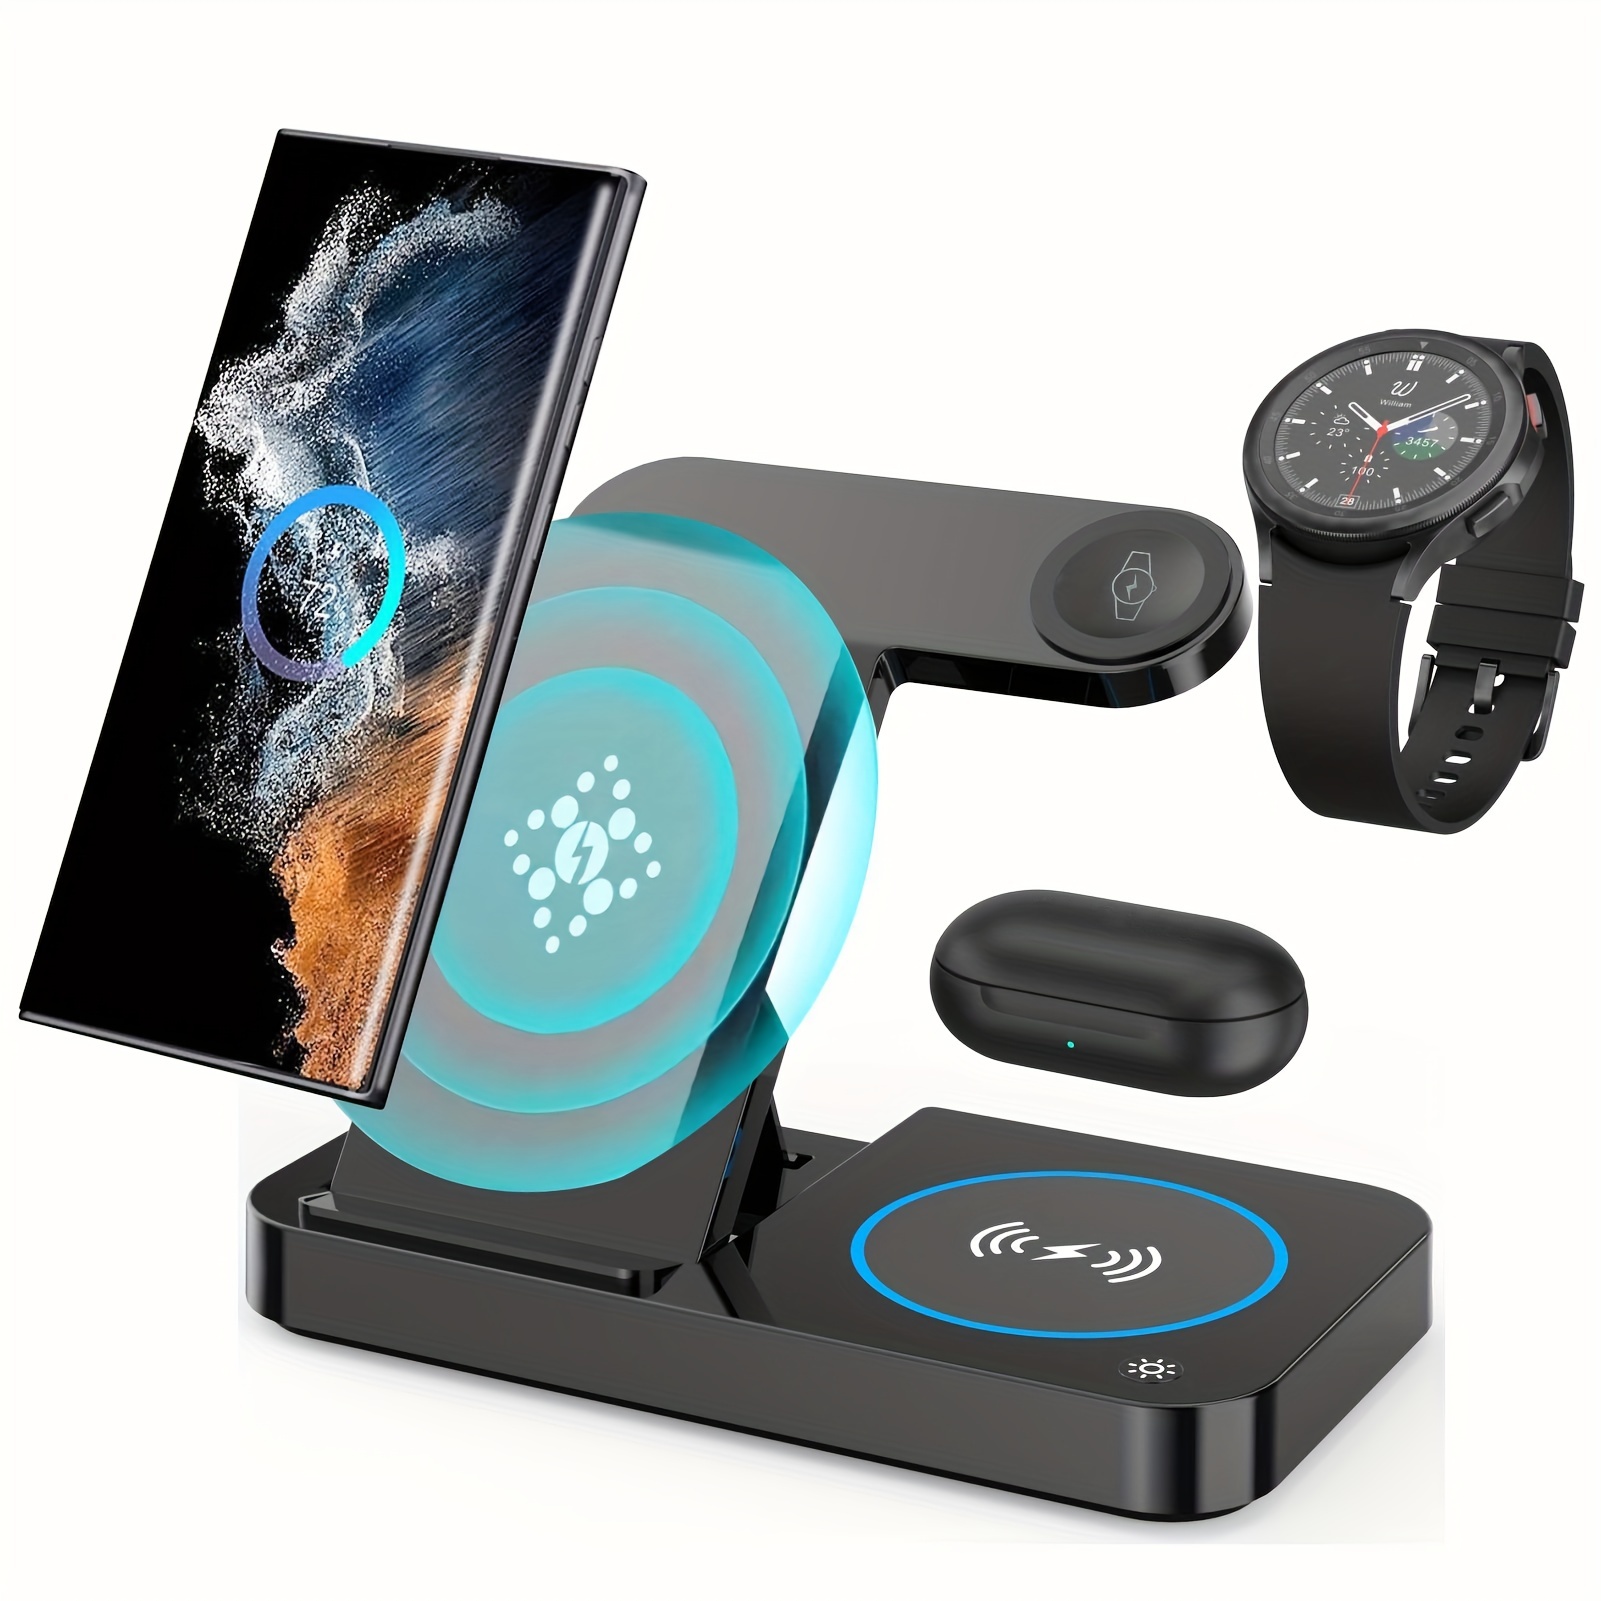  Wireless Charger Samsung 3 in 1 Qi Fast Wireless Charging  Station for Multiple Devices Android Galaxy Watch 5/4/3/Active2/1/Gear S3, Galaxy S22/S21/S20/S10/Note20/Note10/Z Fold 3/Pixel 7/Pixel 6,Buds : Cell  Phones & Accessories